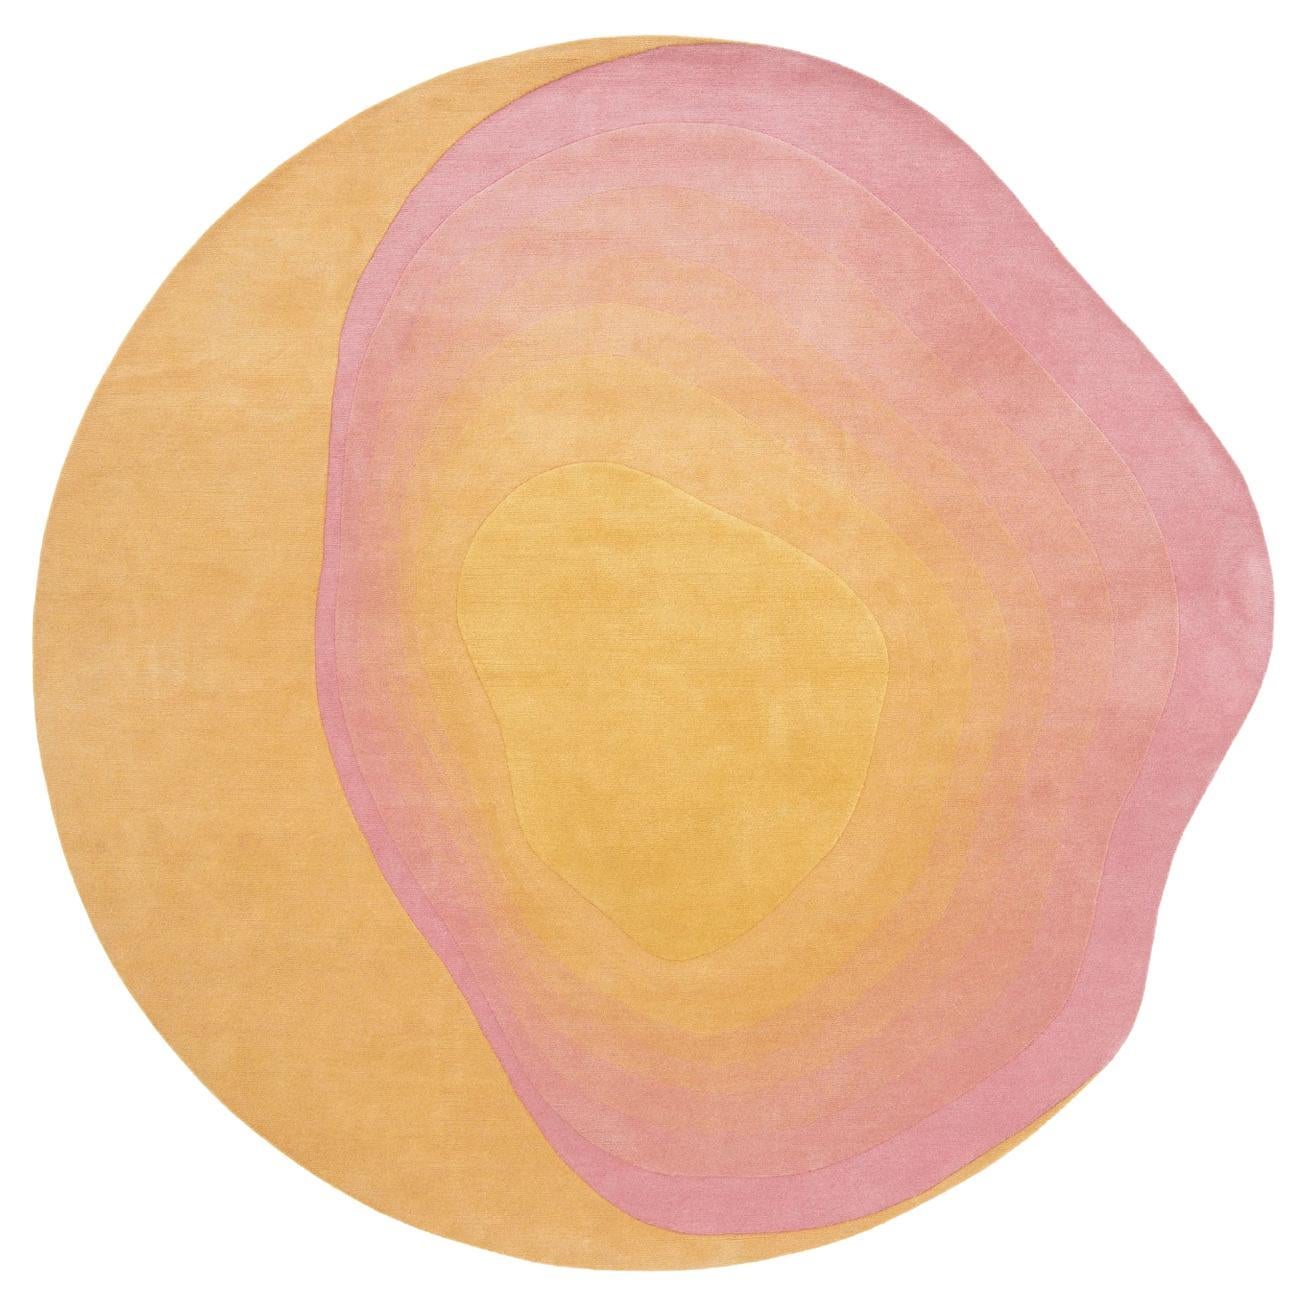 cc-tapis Chroma Radiate Yellow Pink Round Rug by Germans Ermičs For Sale